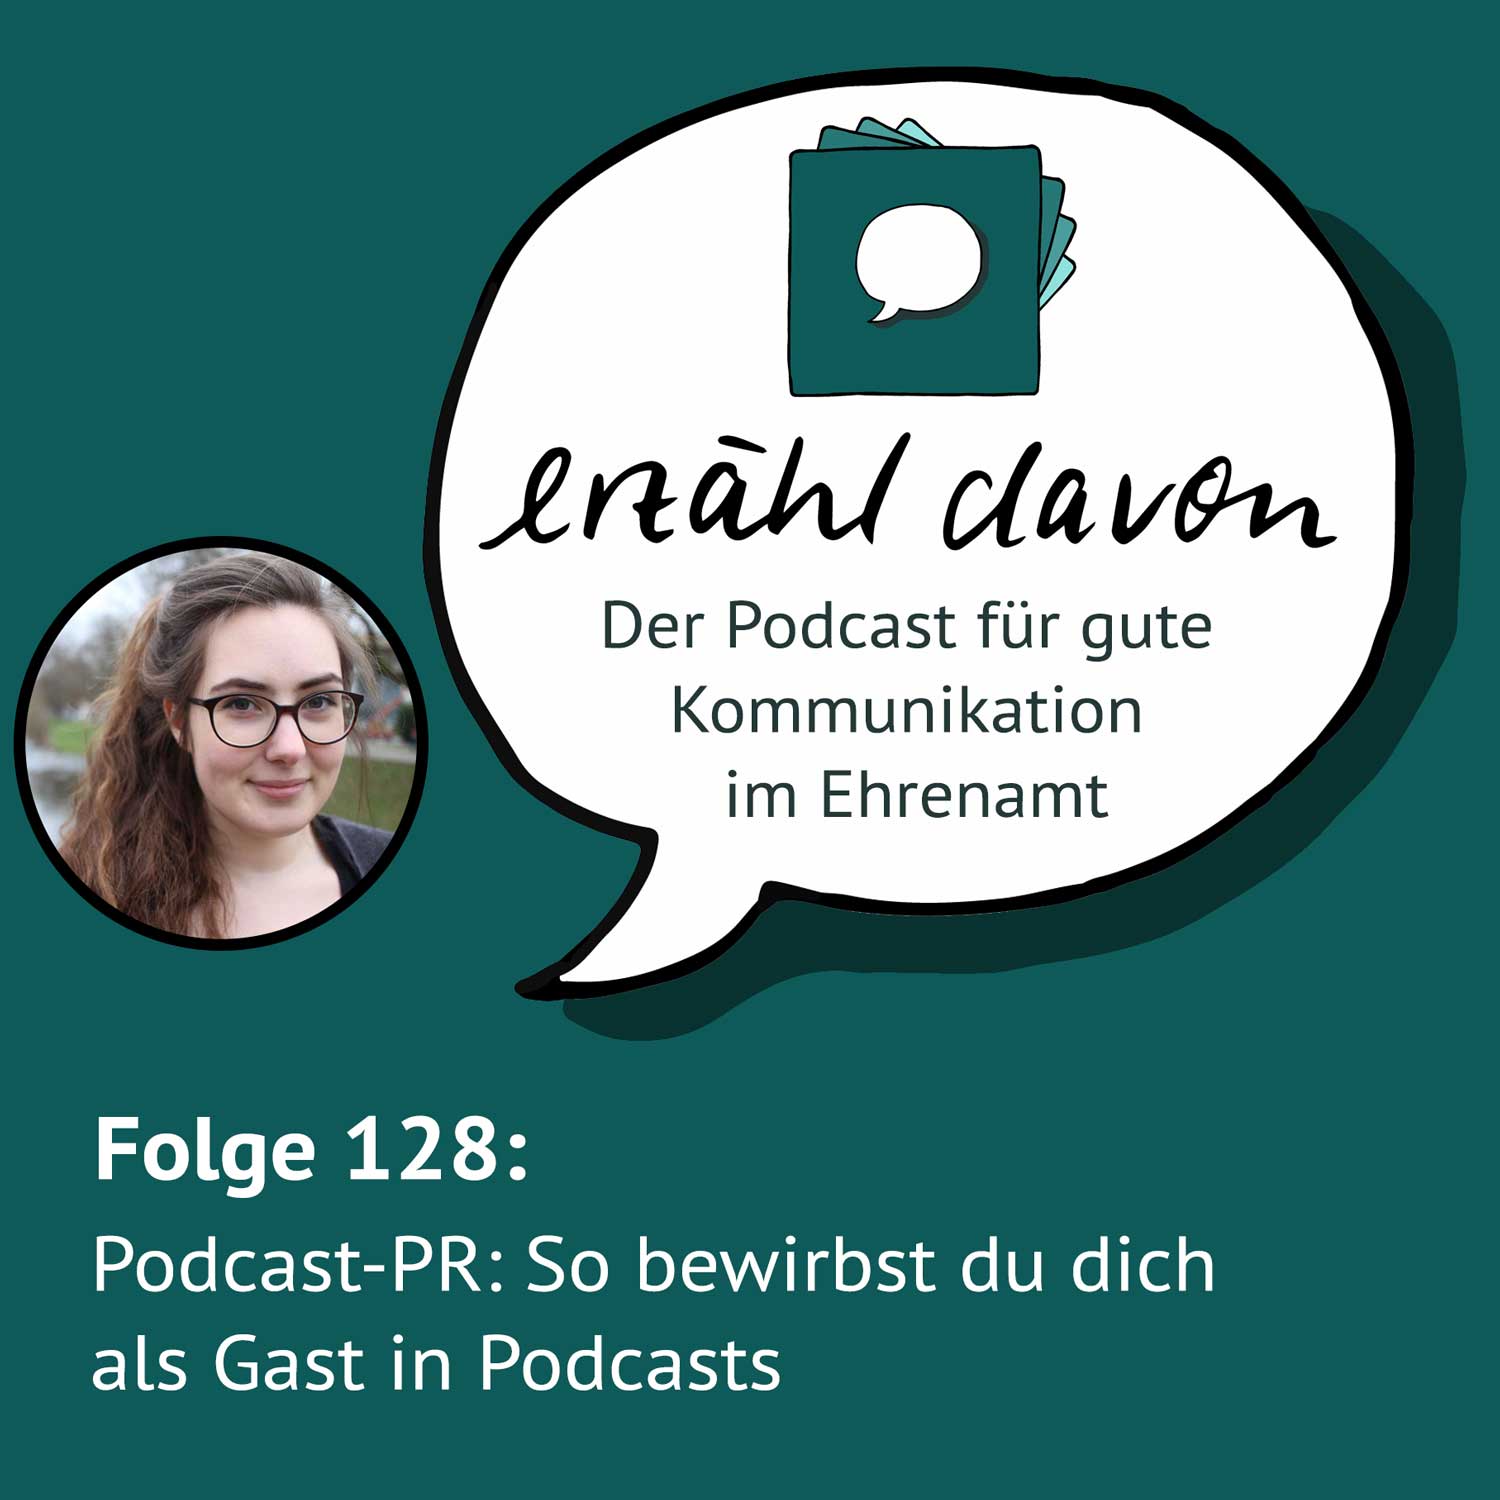 Podcast-PR: So bewirbst du dich als Gast in Podcasts